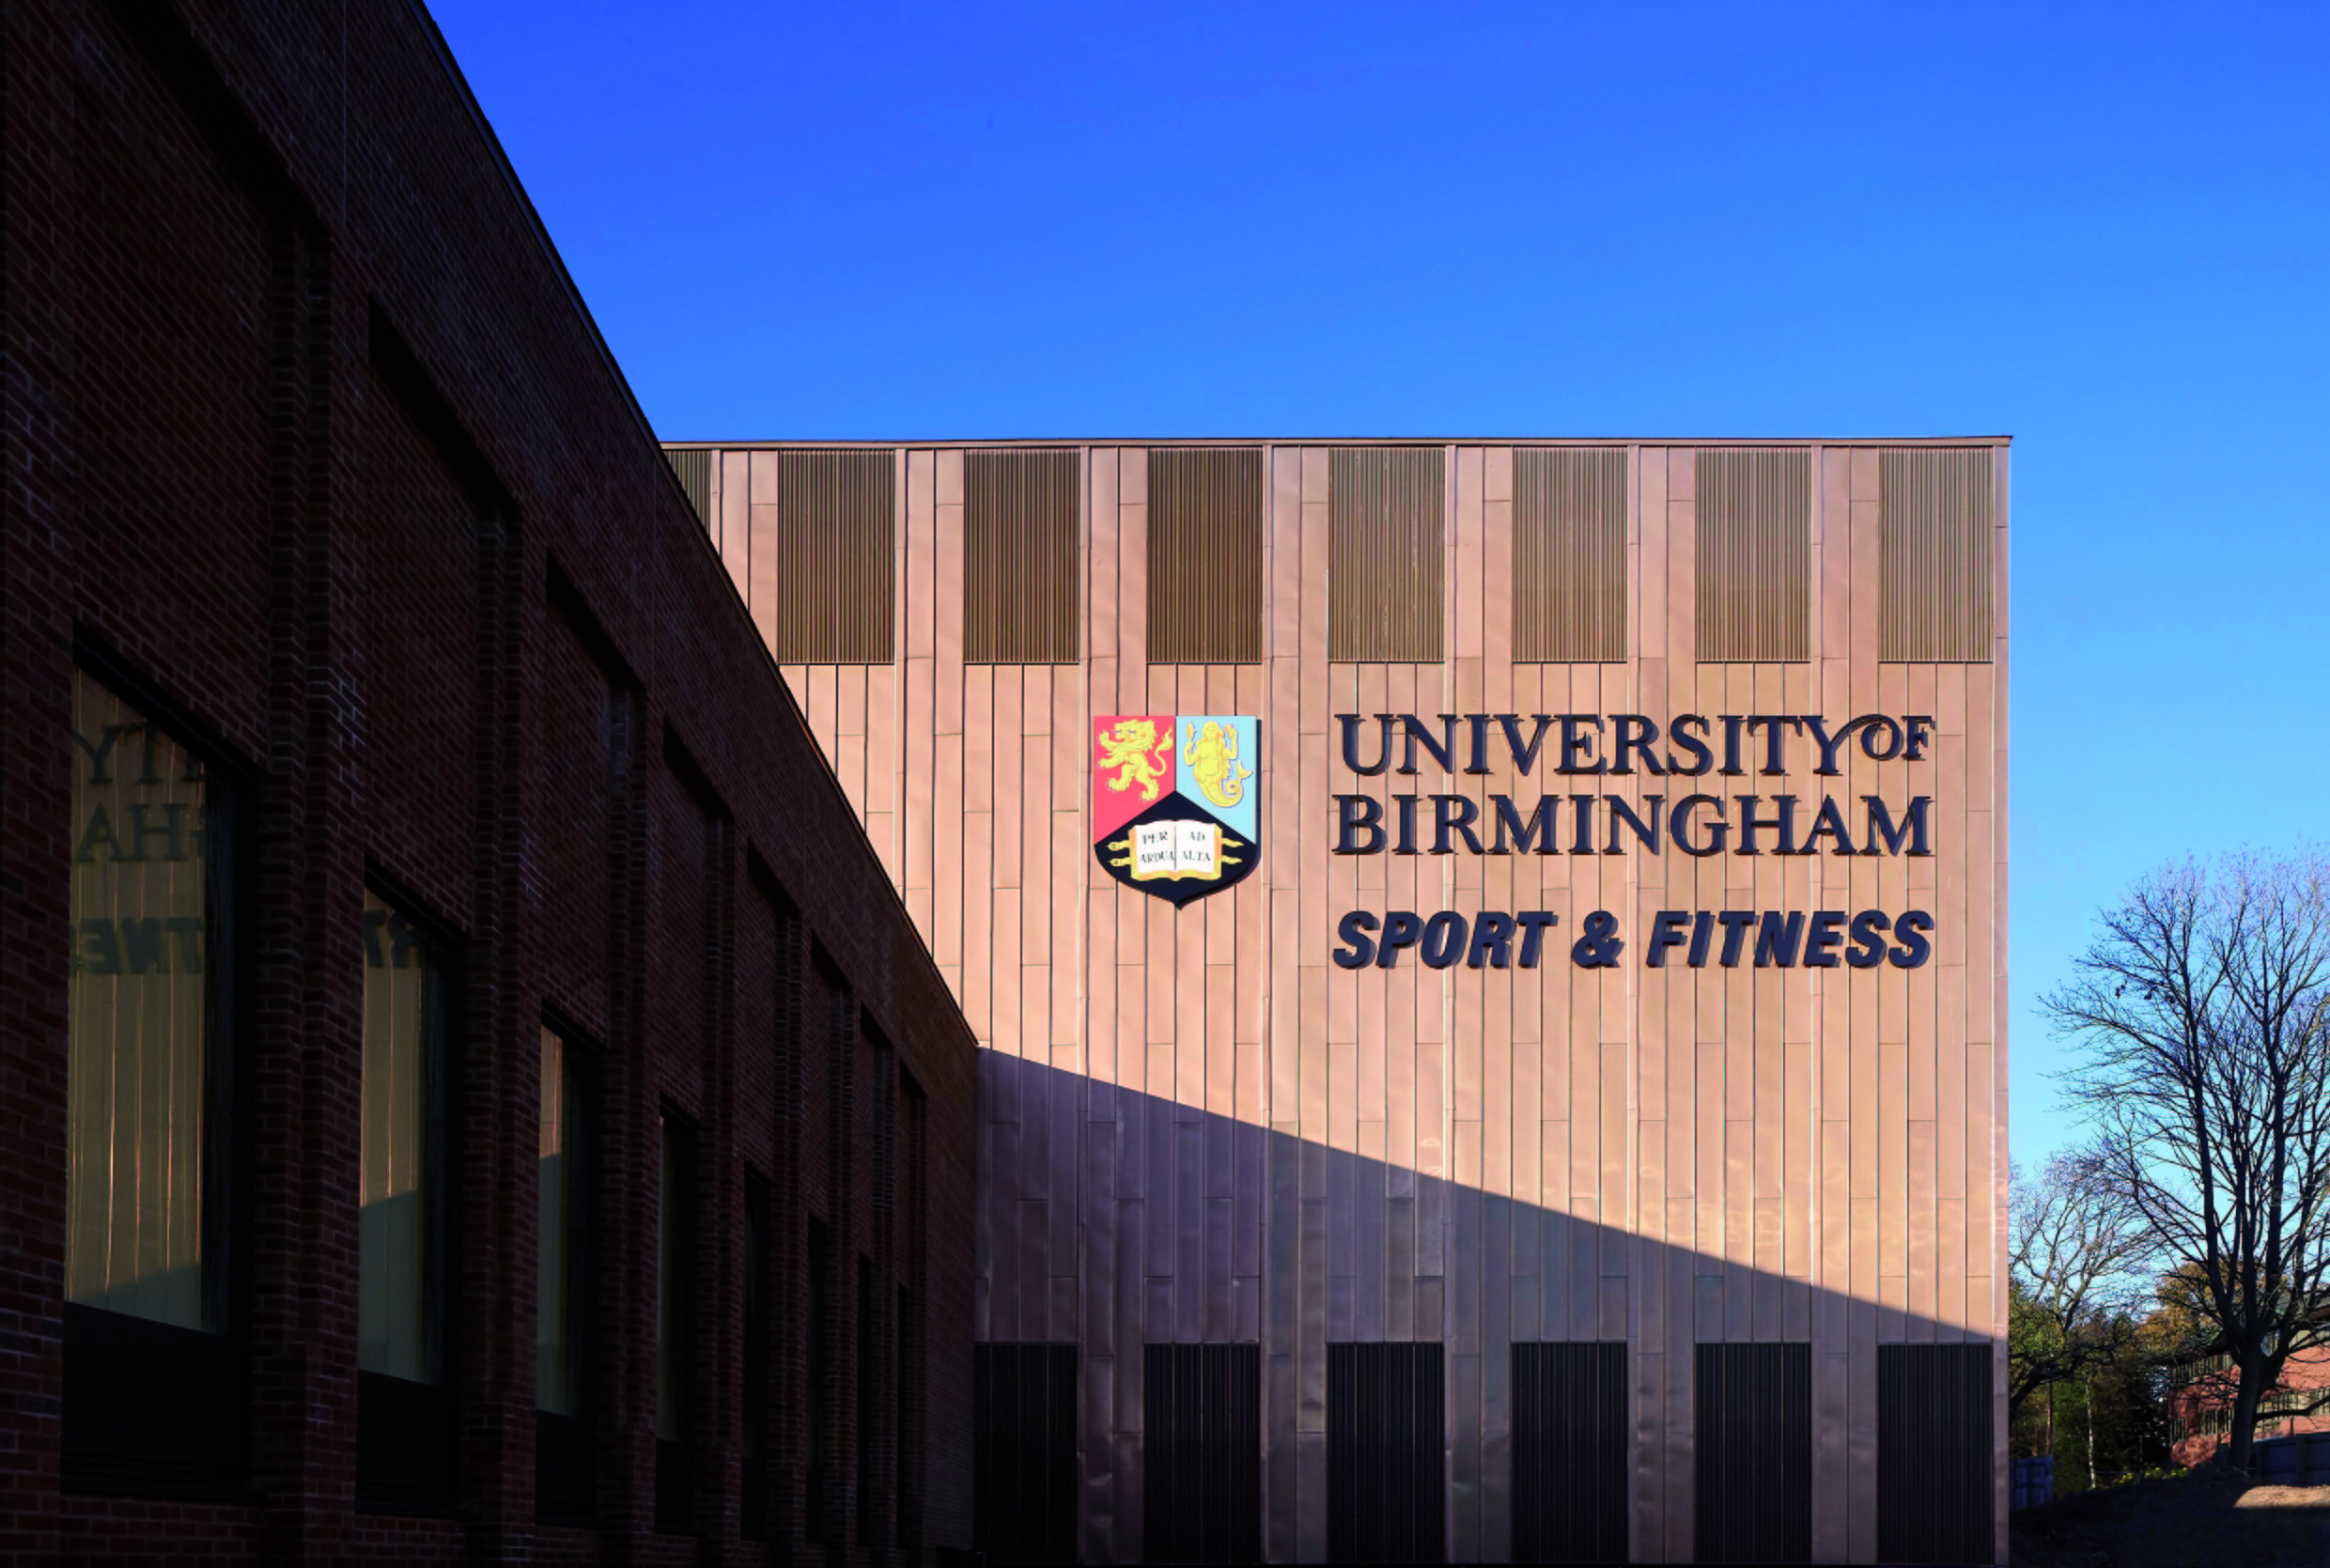 University of Birmingham Sport & Fitness club sign on the outside of the building